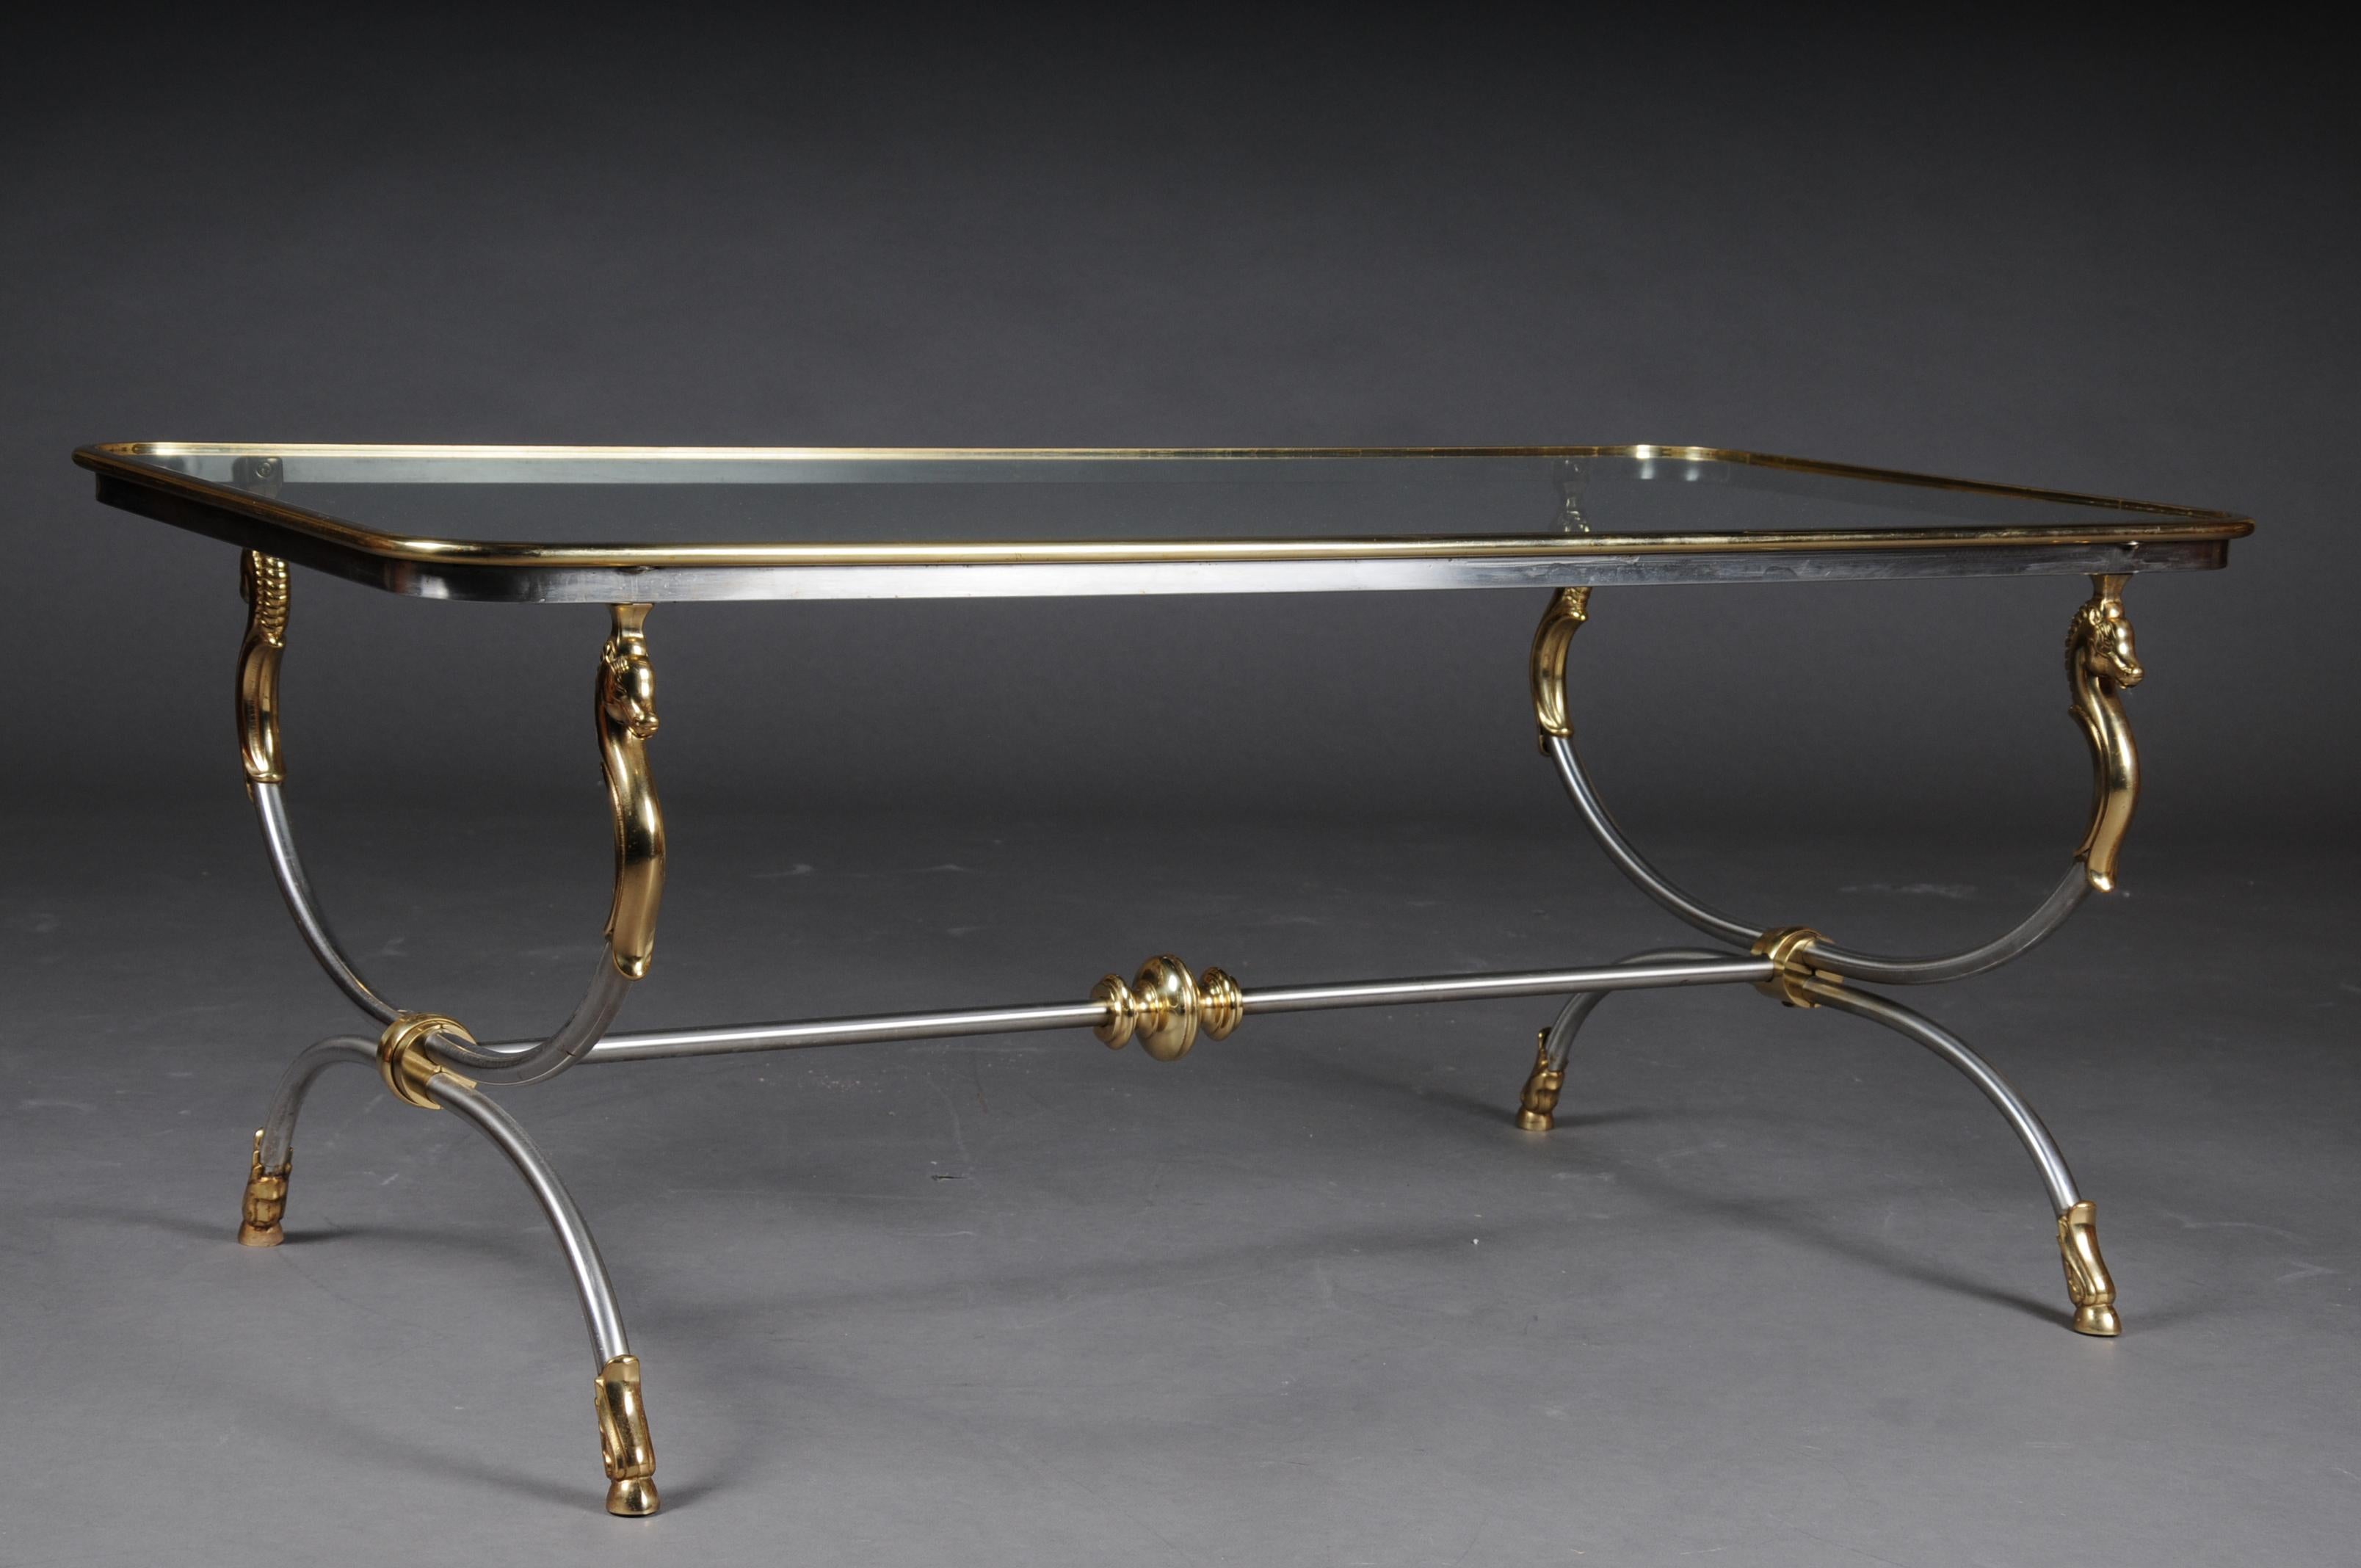 Modern designer coffee table, chrome brass, classical style

Chrome / brass frame, curved and flanked by horse busts in brass. Polished brass frame enclosed in a glass plate.

(A-170).